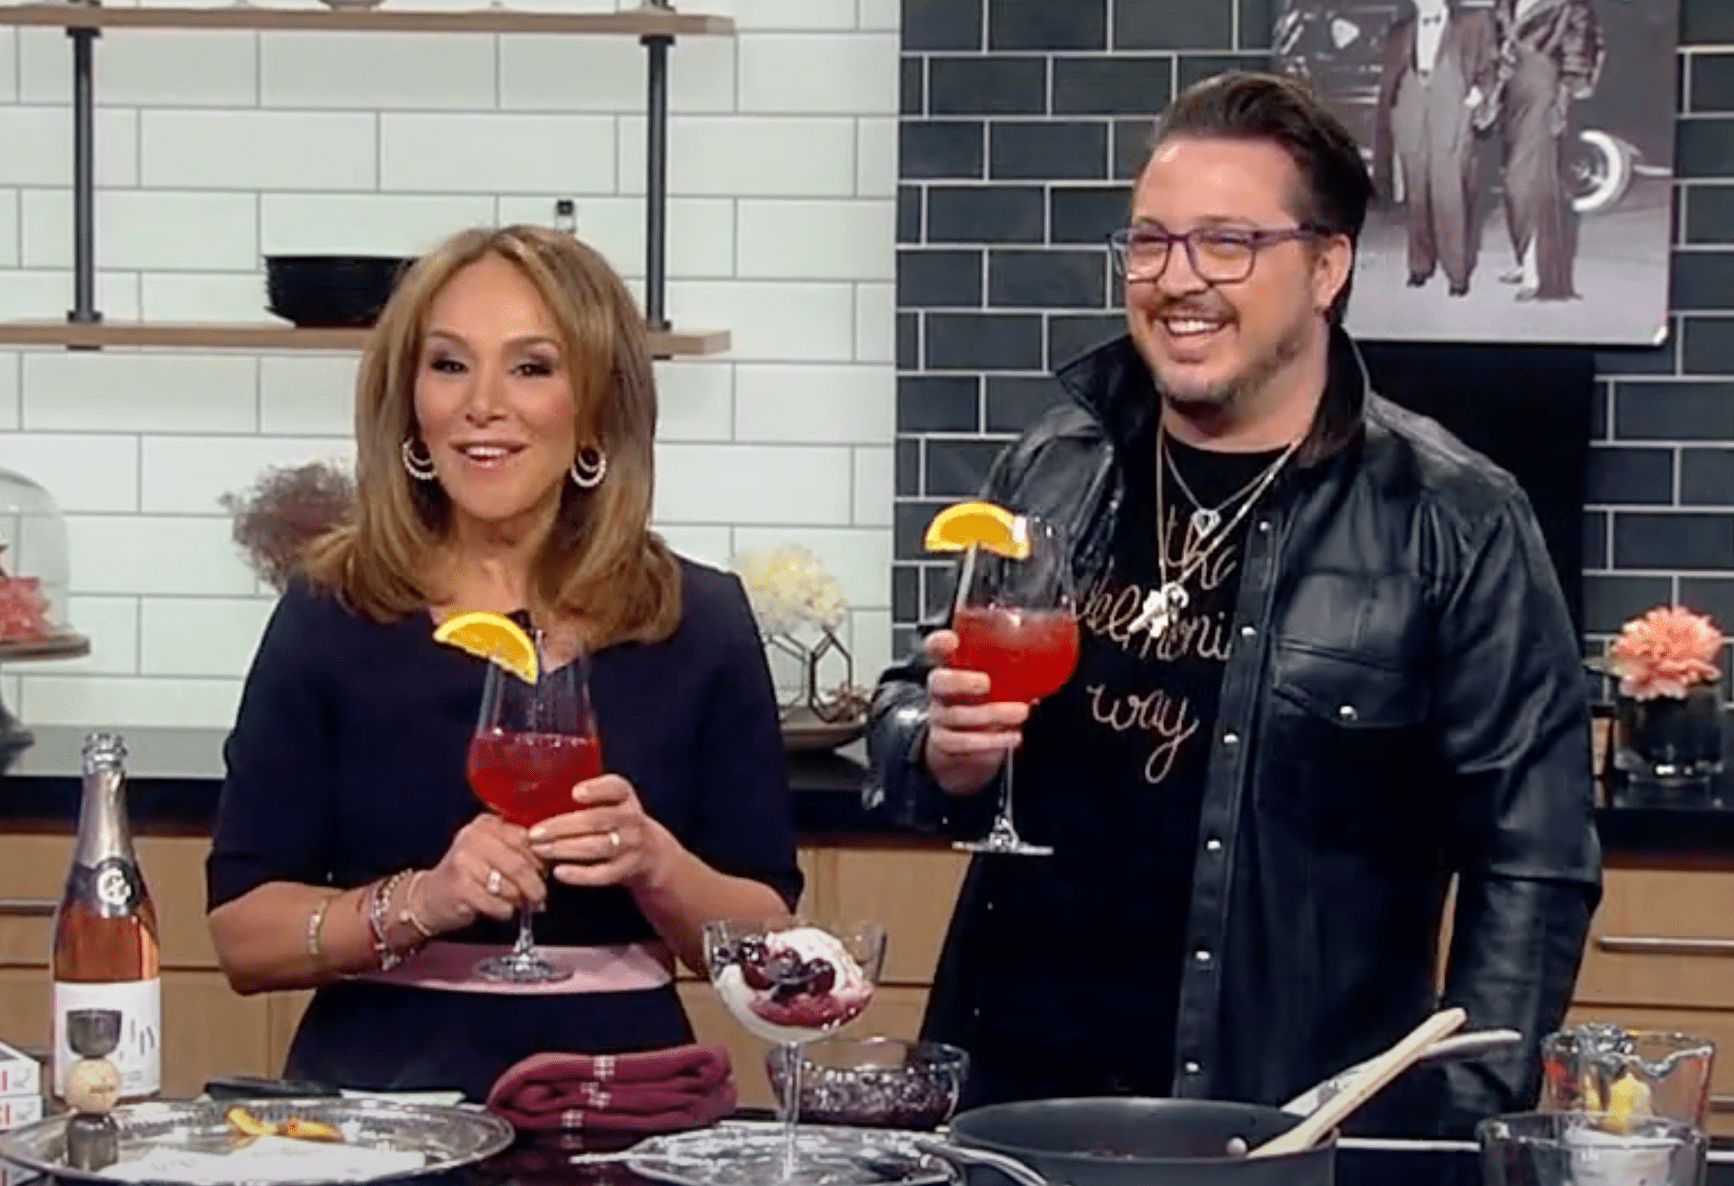 Rosanna Scotto and Max Tucci with Negronis